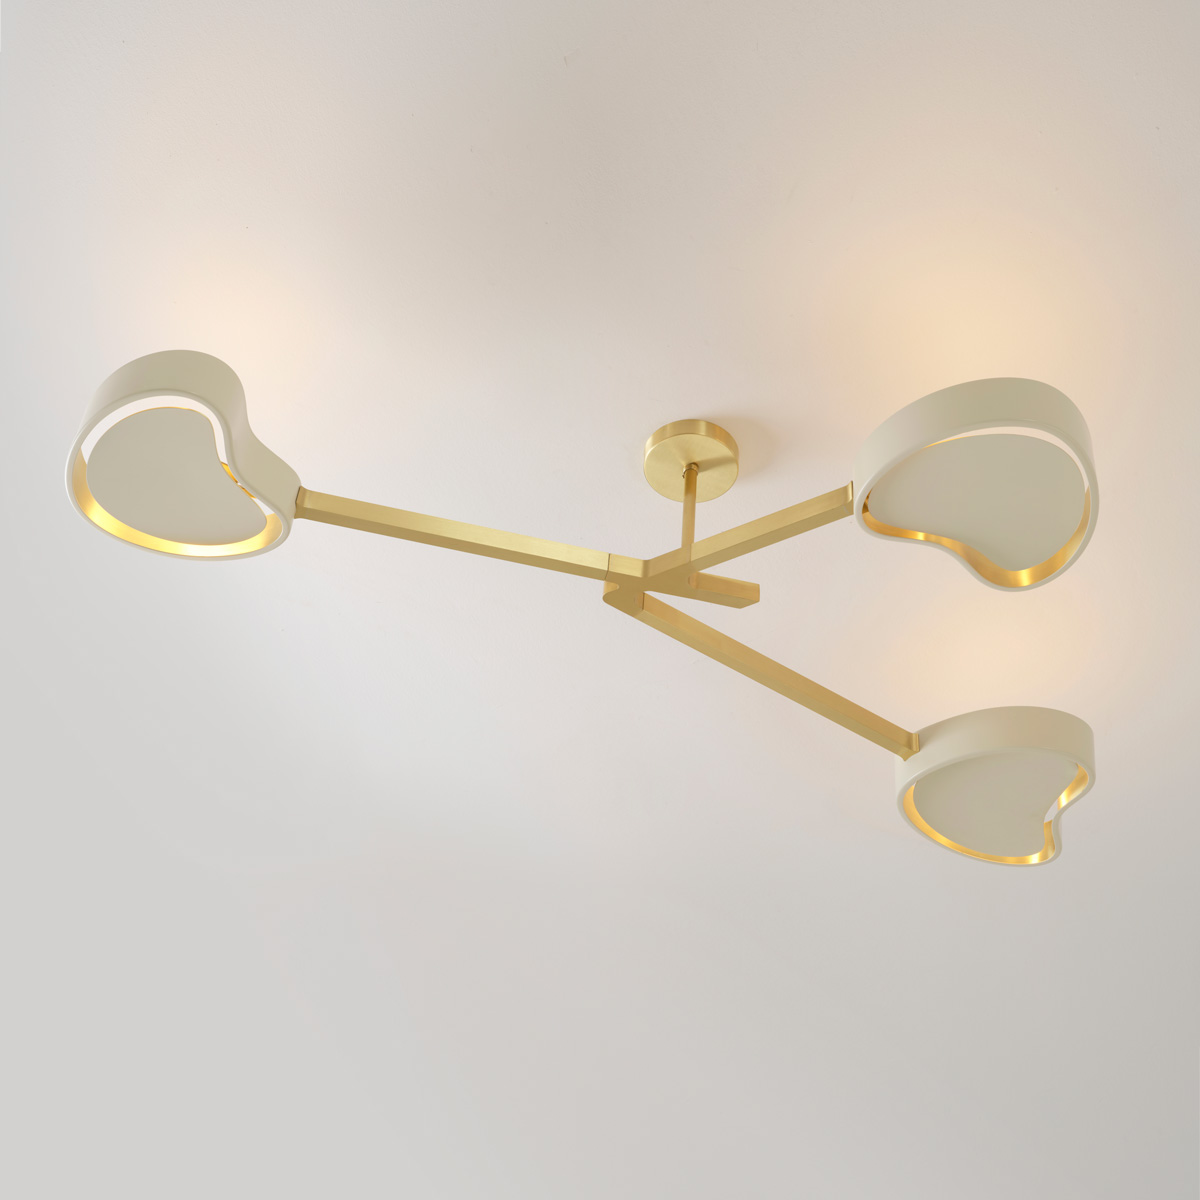 Cuore N3 ceiling light by Gaspare Asaro